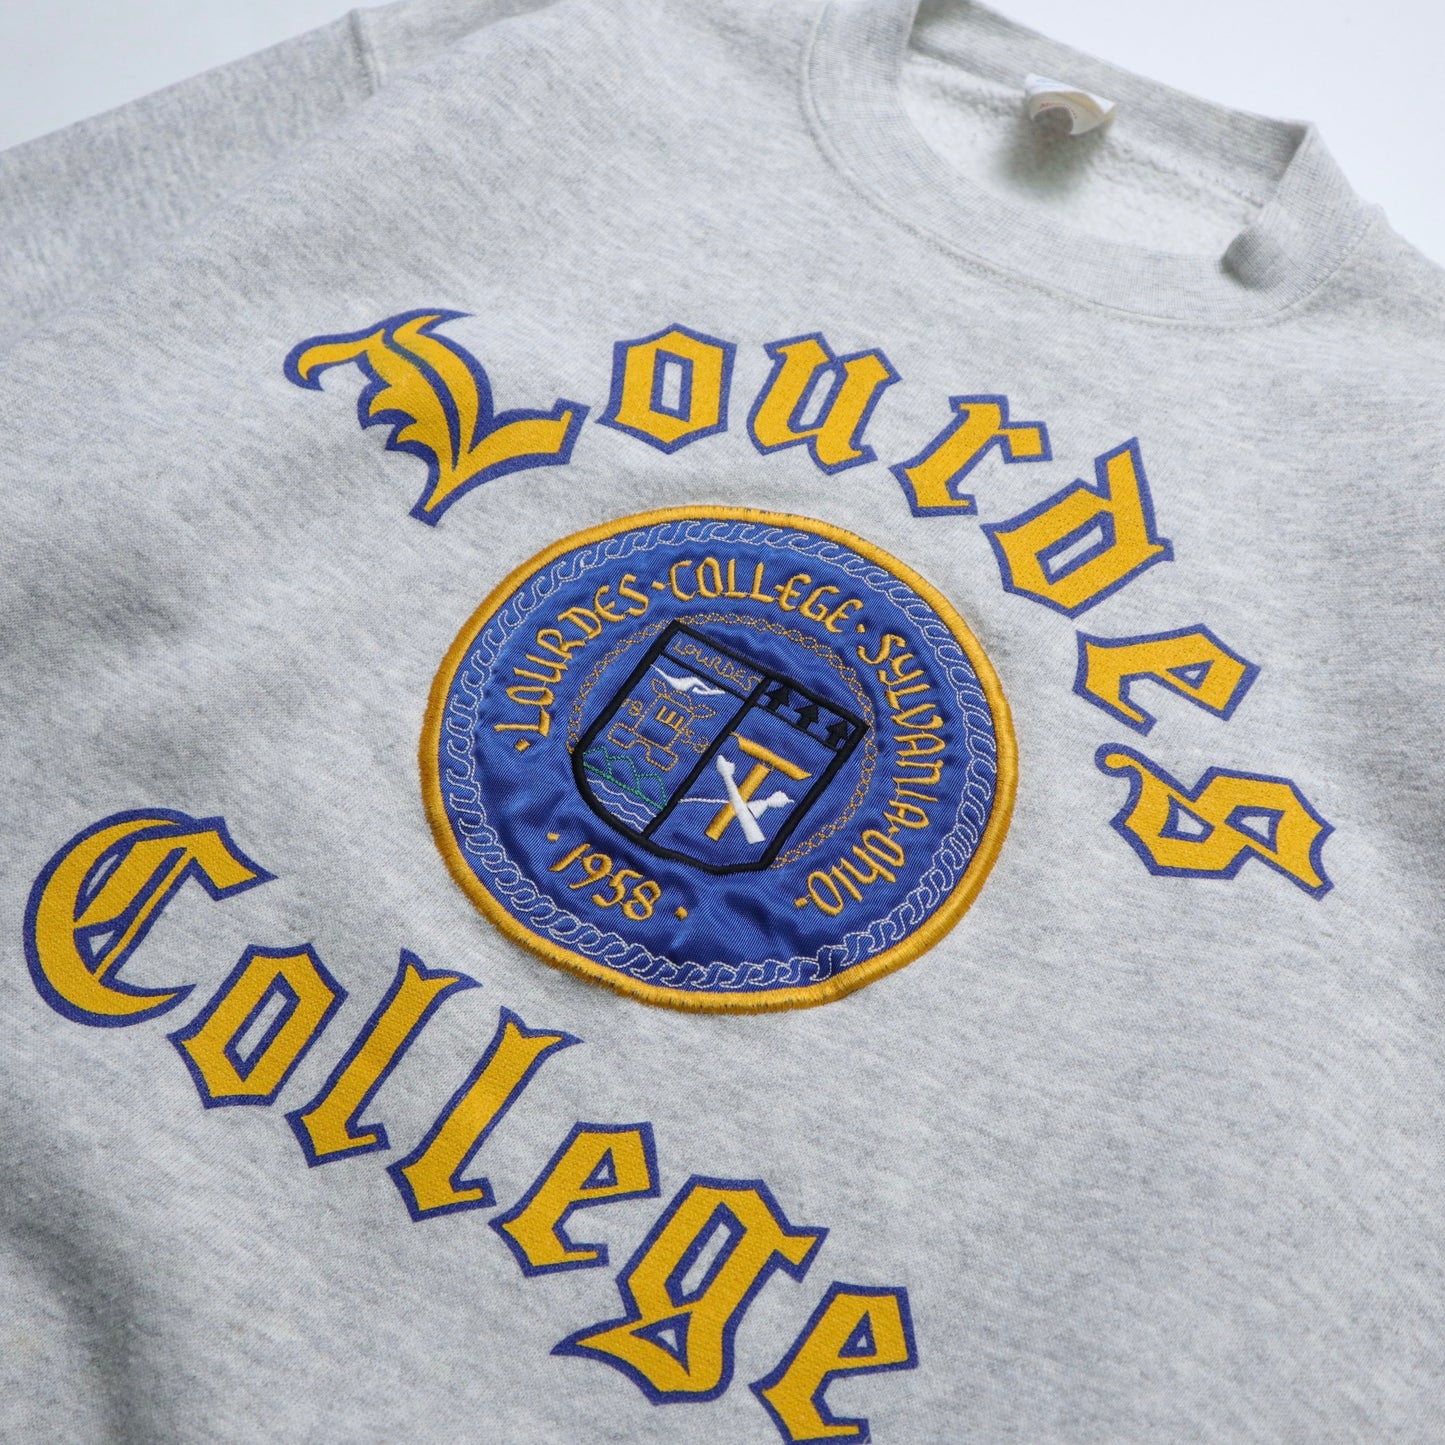 90s American-made Lourdes College embroidered patch college tee vintage sweatshirt